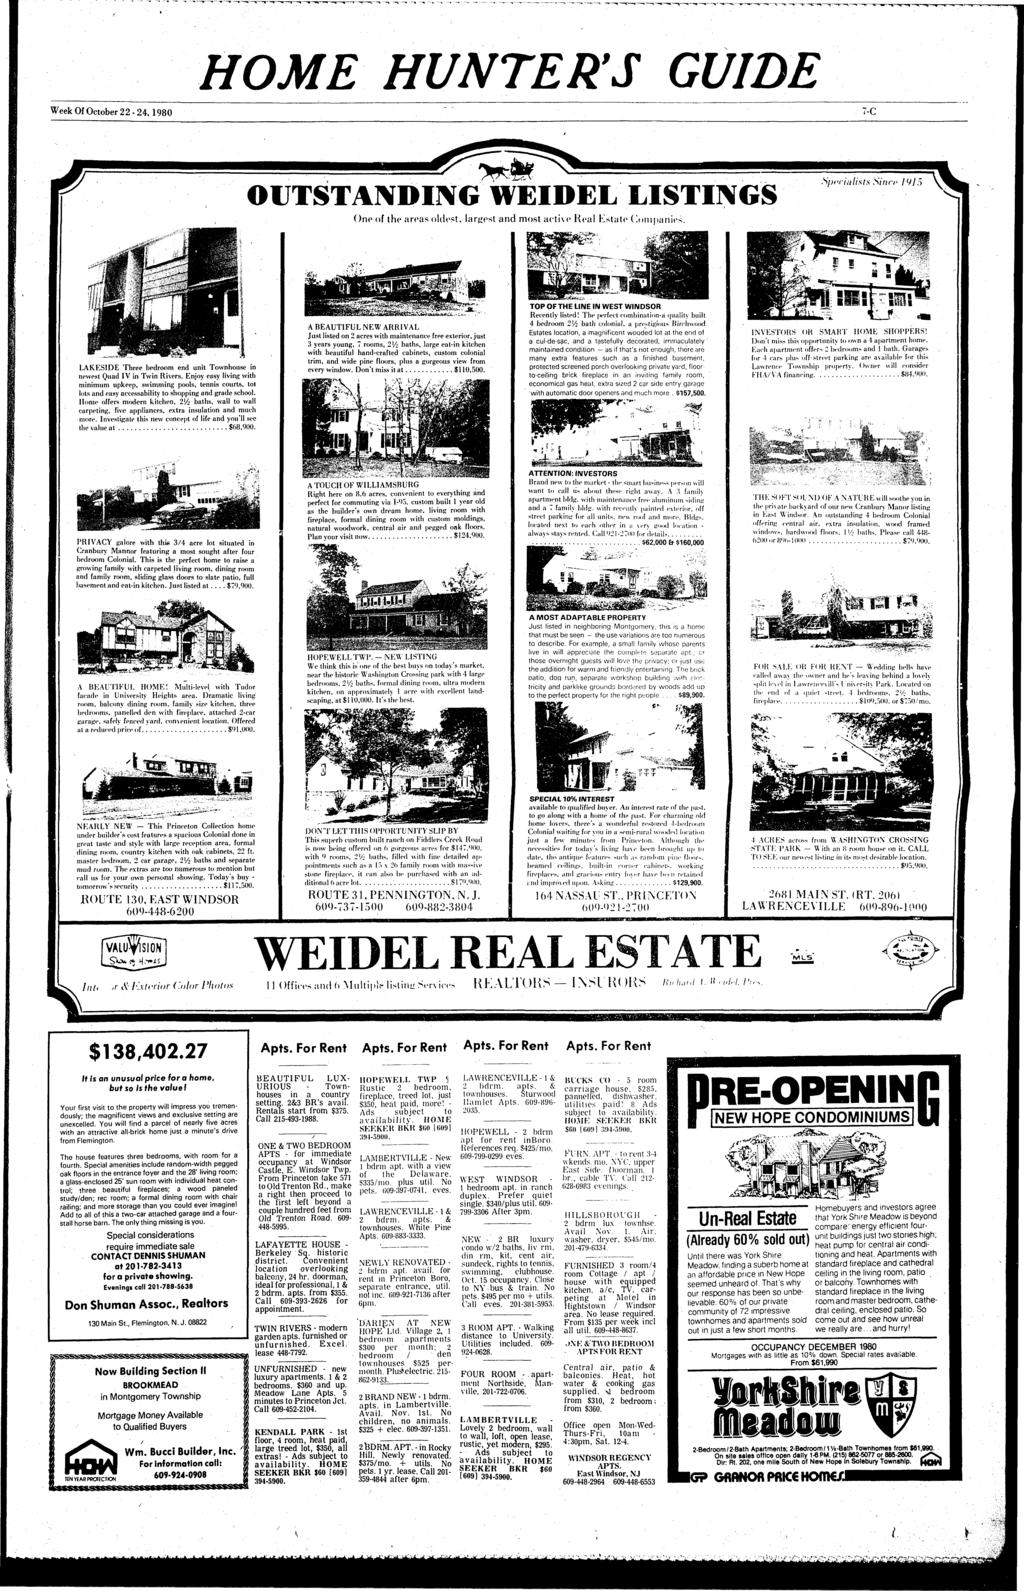 HOME HUNTER'S GUIDE Week Of October 22-24.1980 7-C OUTSTANDING WEIDEL LISTINGS One of the areas oldest, largest and most active Real Kstate Companies.